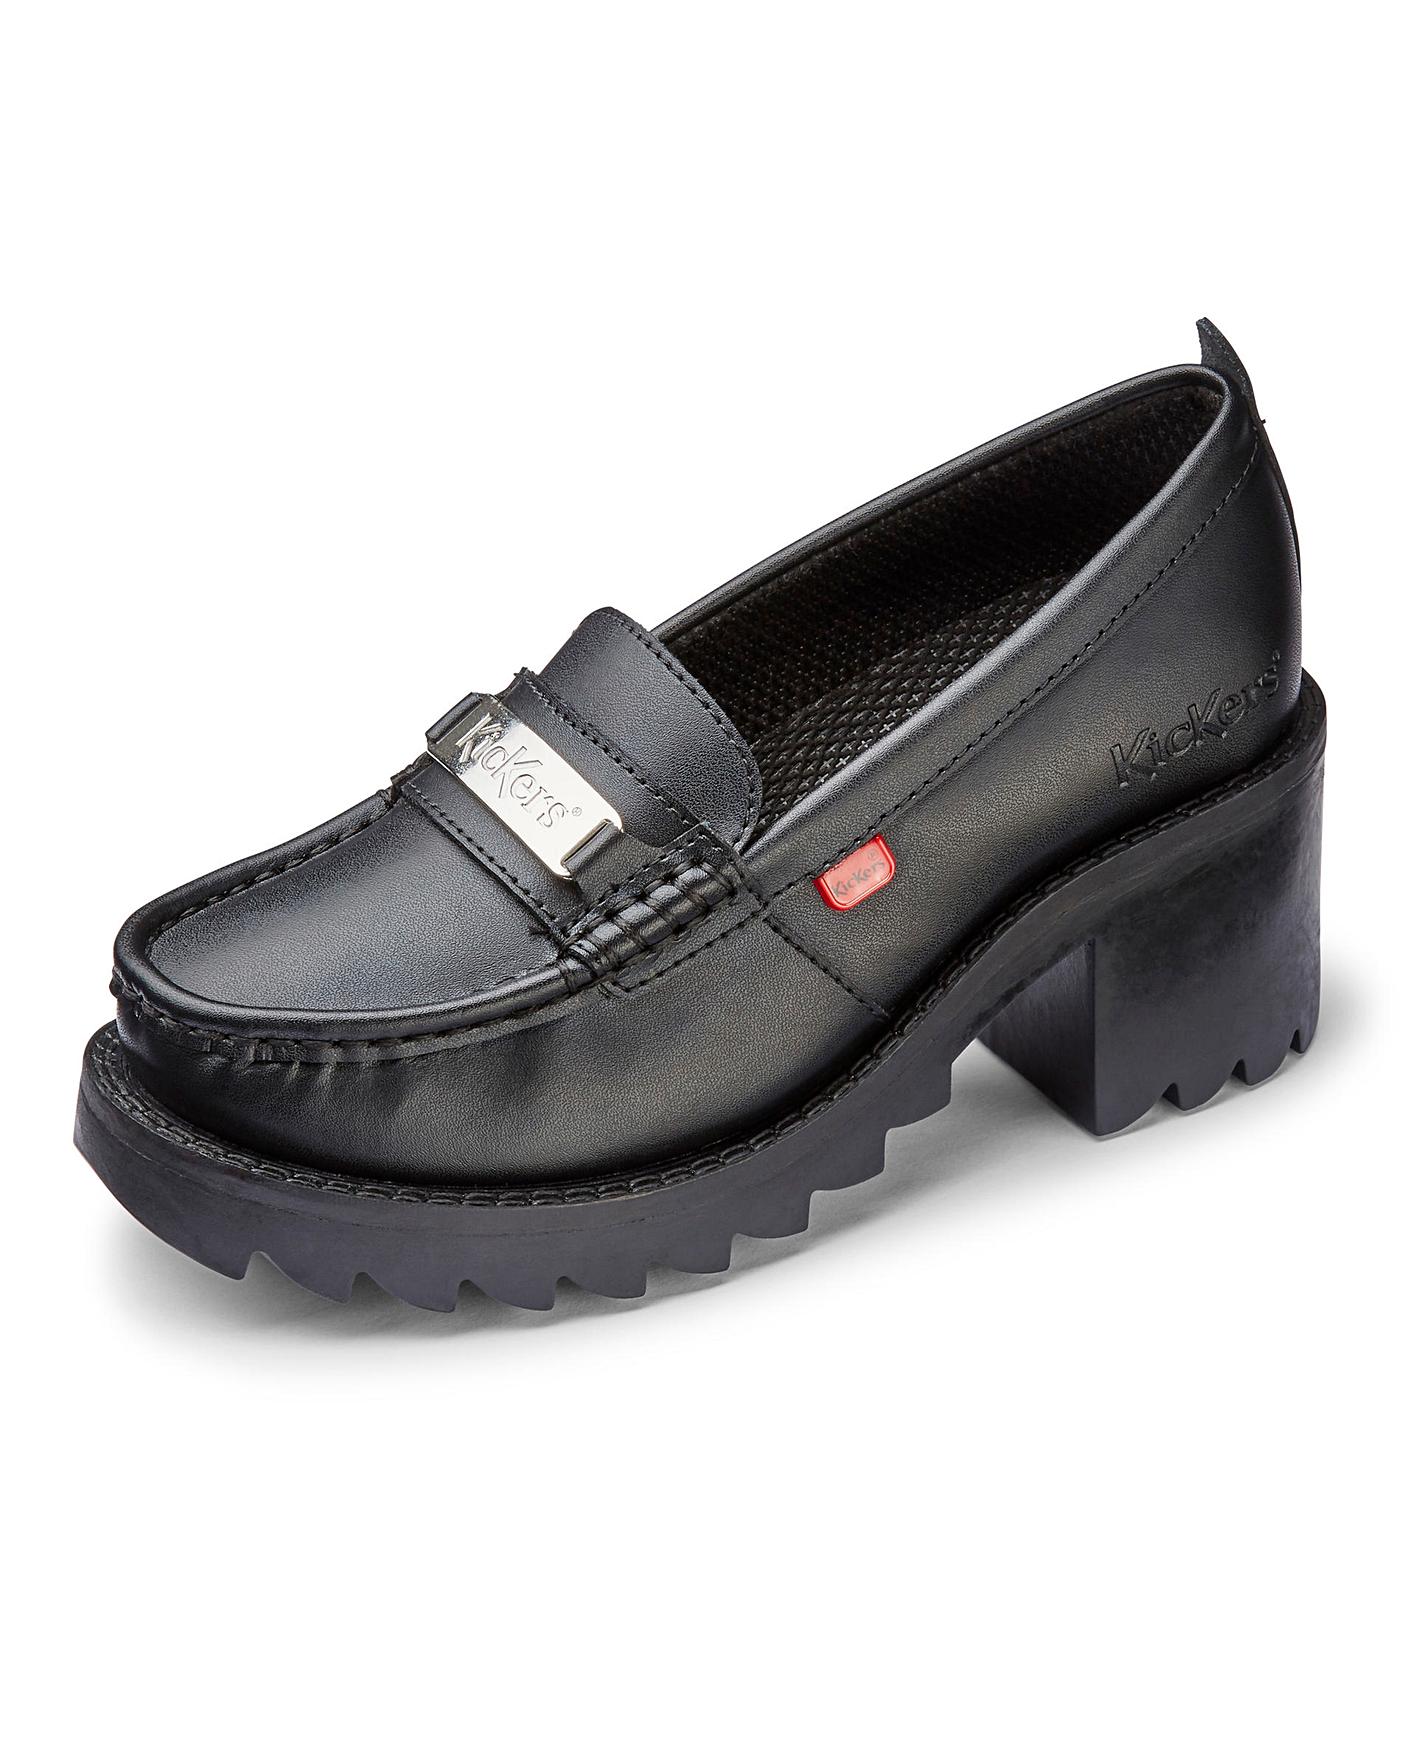 loafer kickers